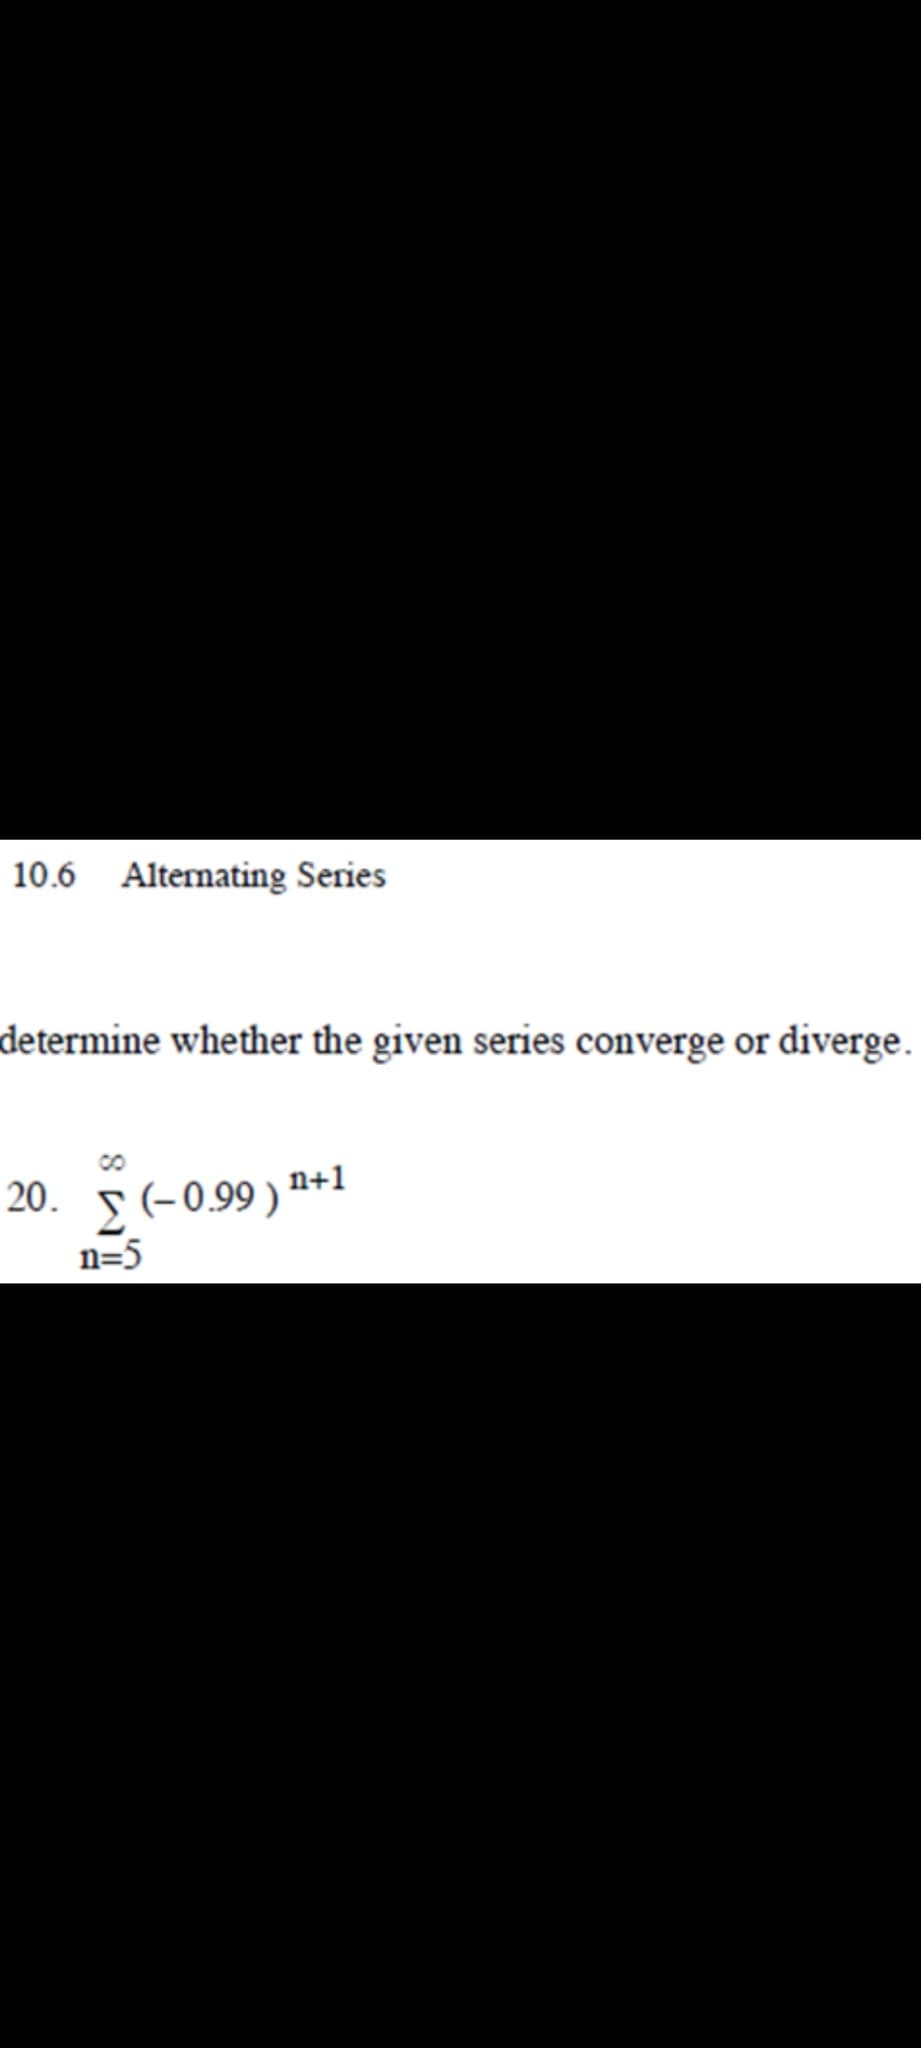 10.6 Alternating Series
determine whether the given series converge or diverge.
20. (-0.99) ¹+1
n=5